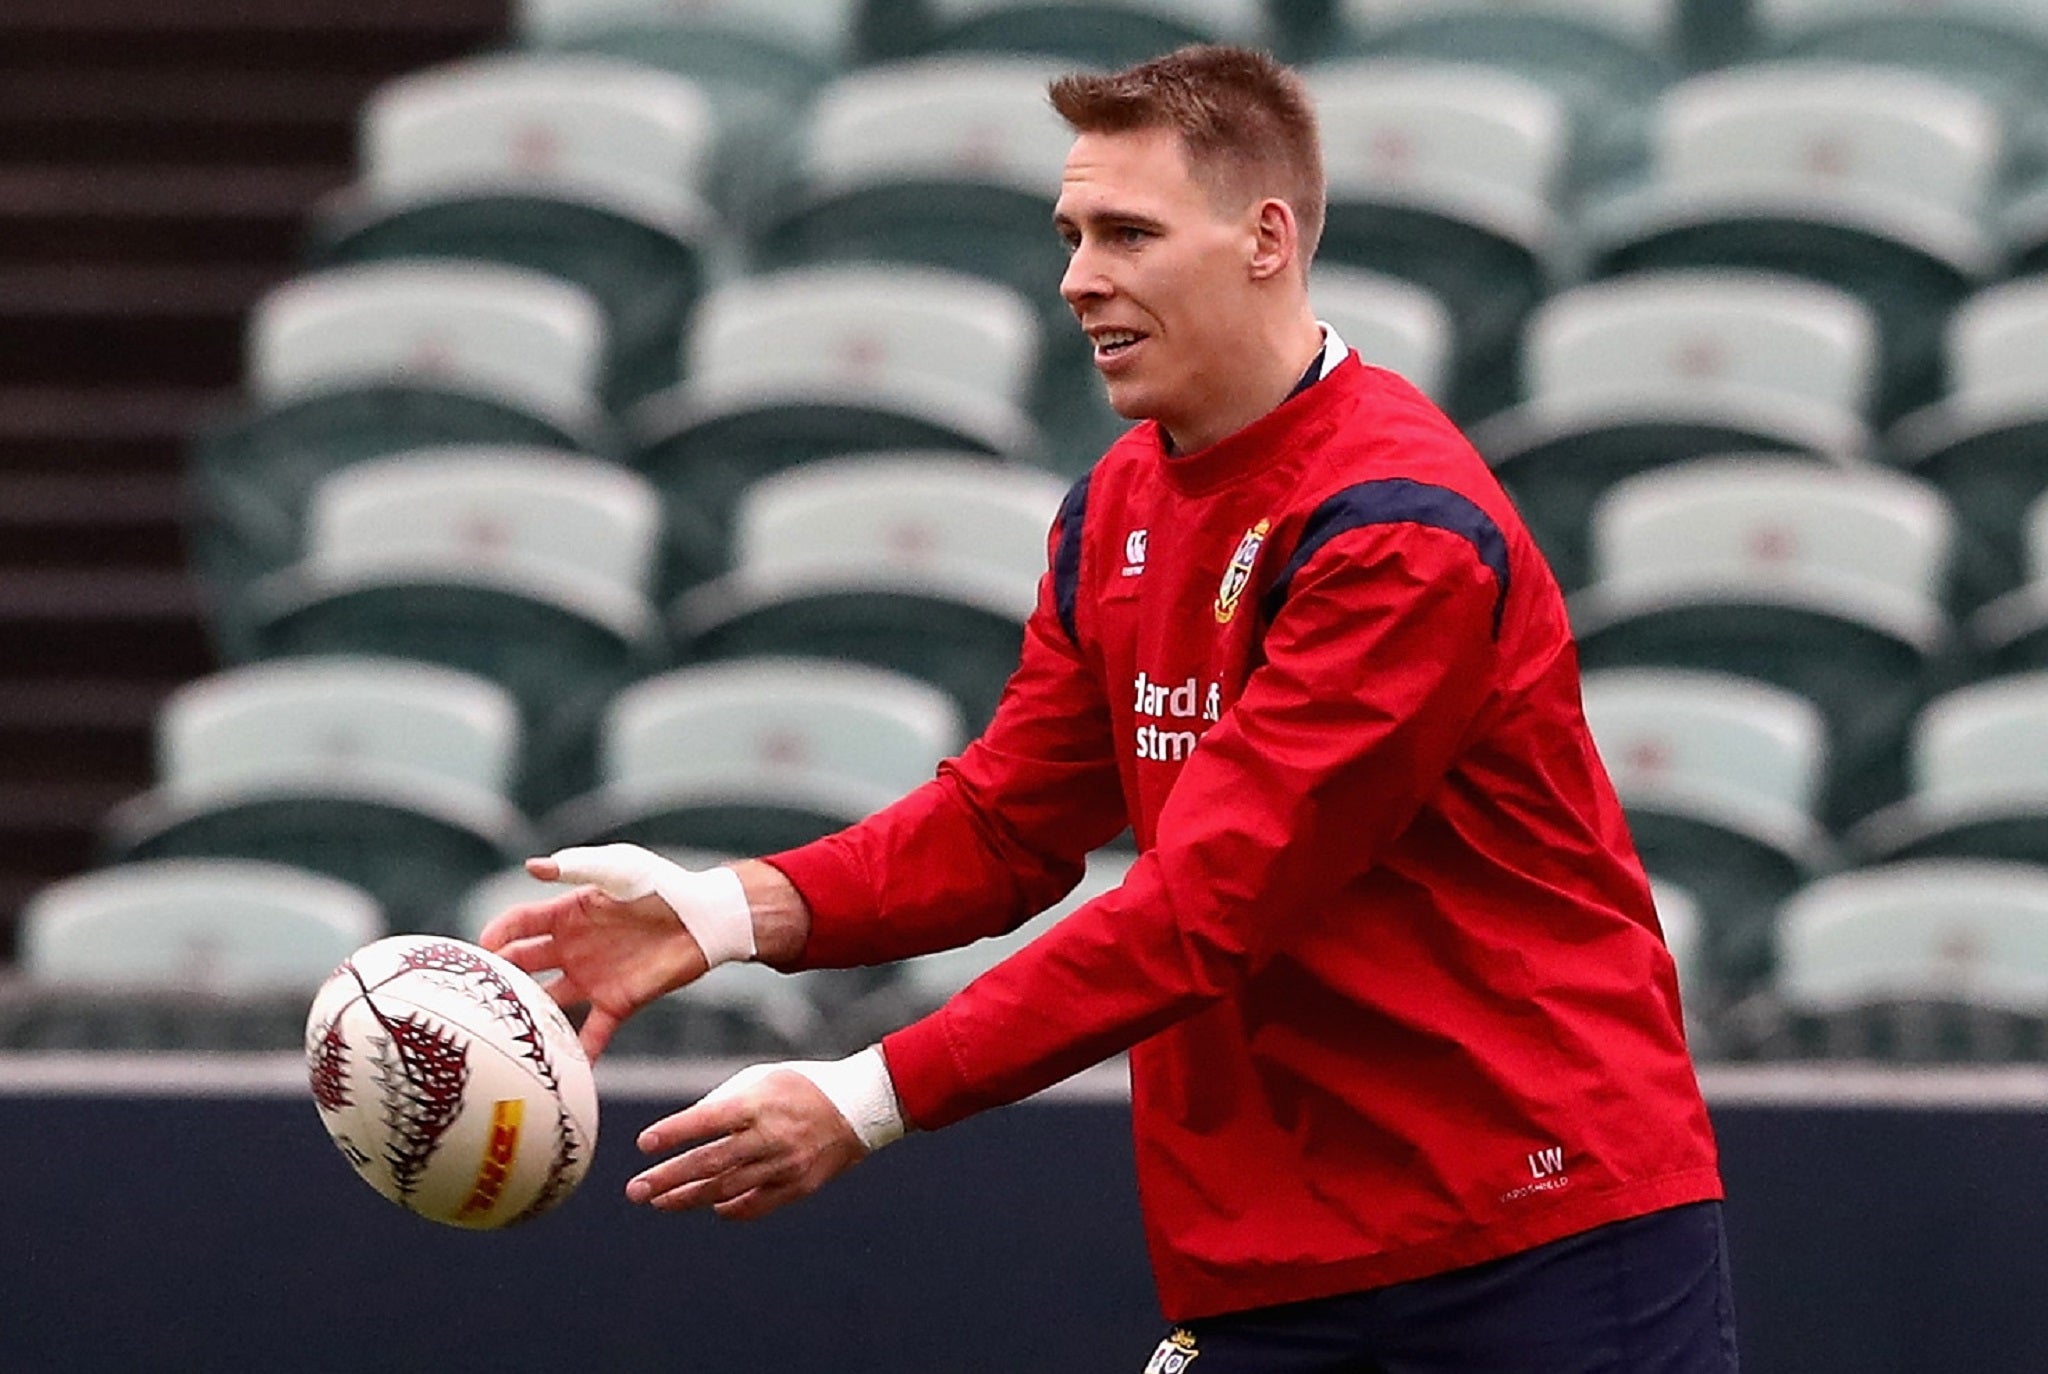 Liam Williams starts the first Test for the British and Irish Lions against New Zealand at full-back